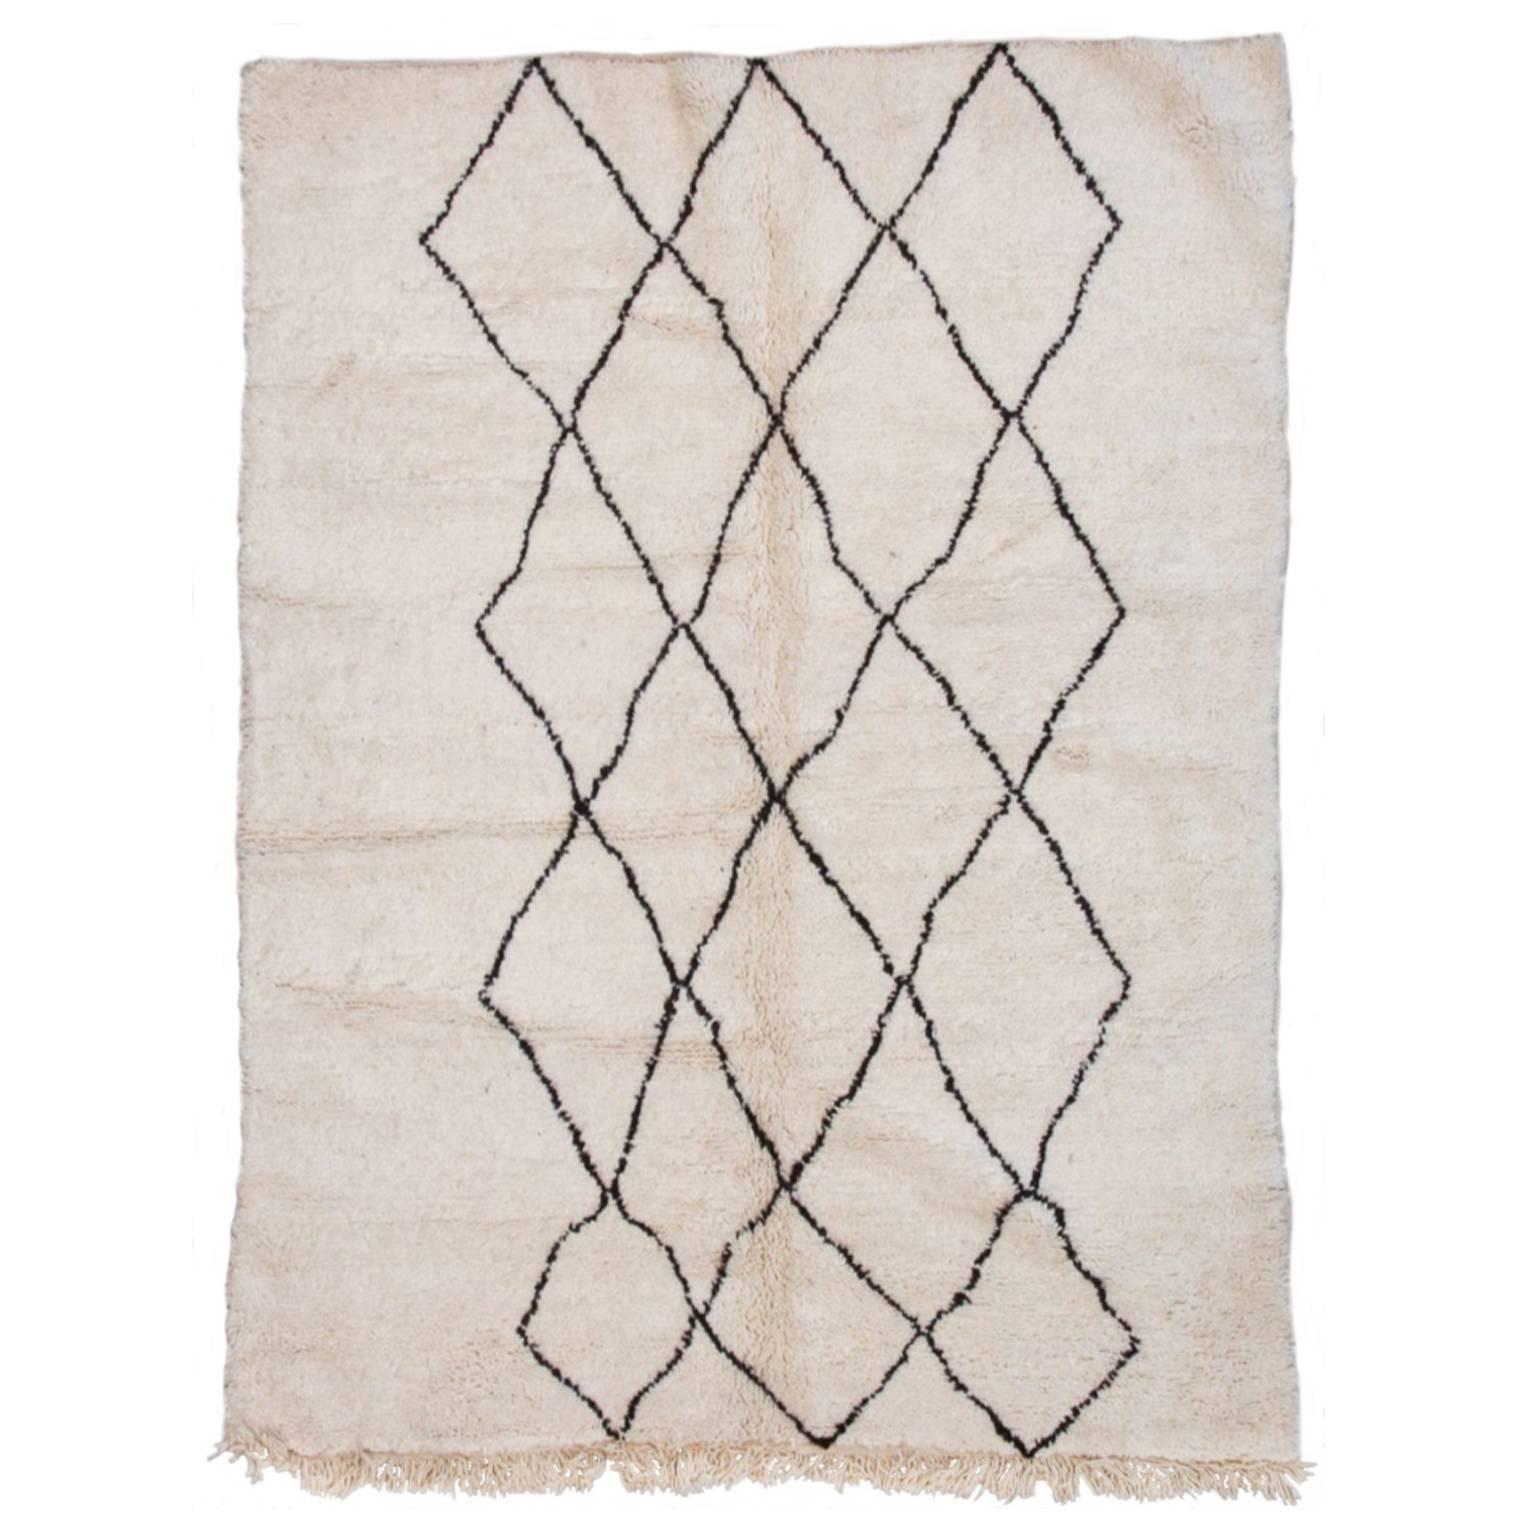 Beni Ourain Moroccan Rug with Three Column Diamond Pattern For Sale